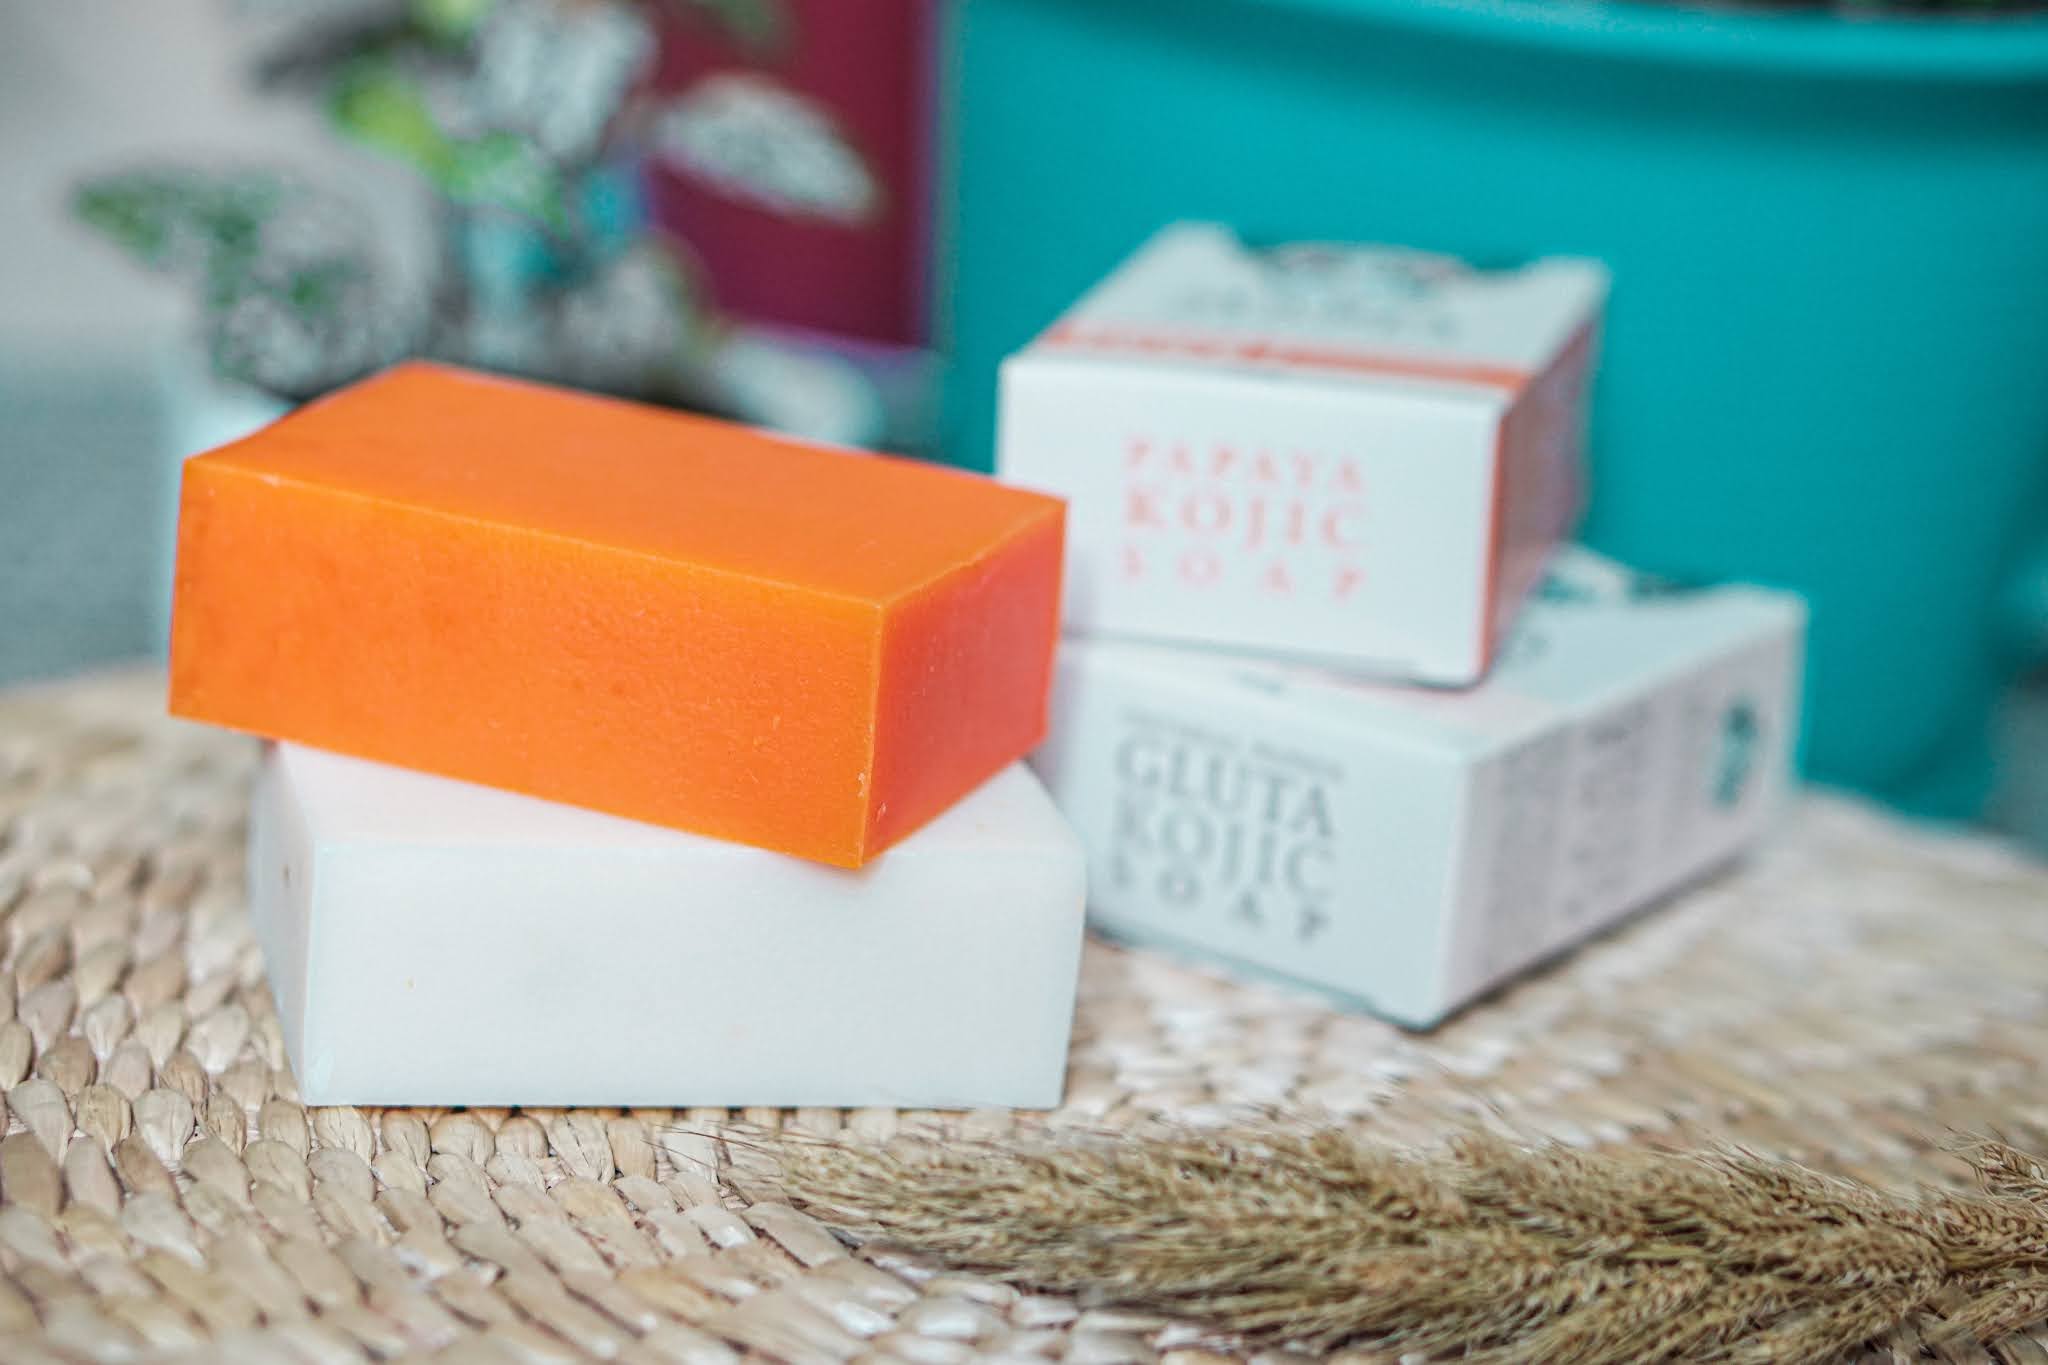 Diwatang Maria Soaps for a healthy-looking skin, organically.